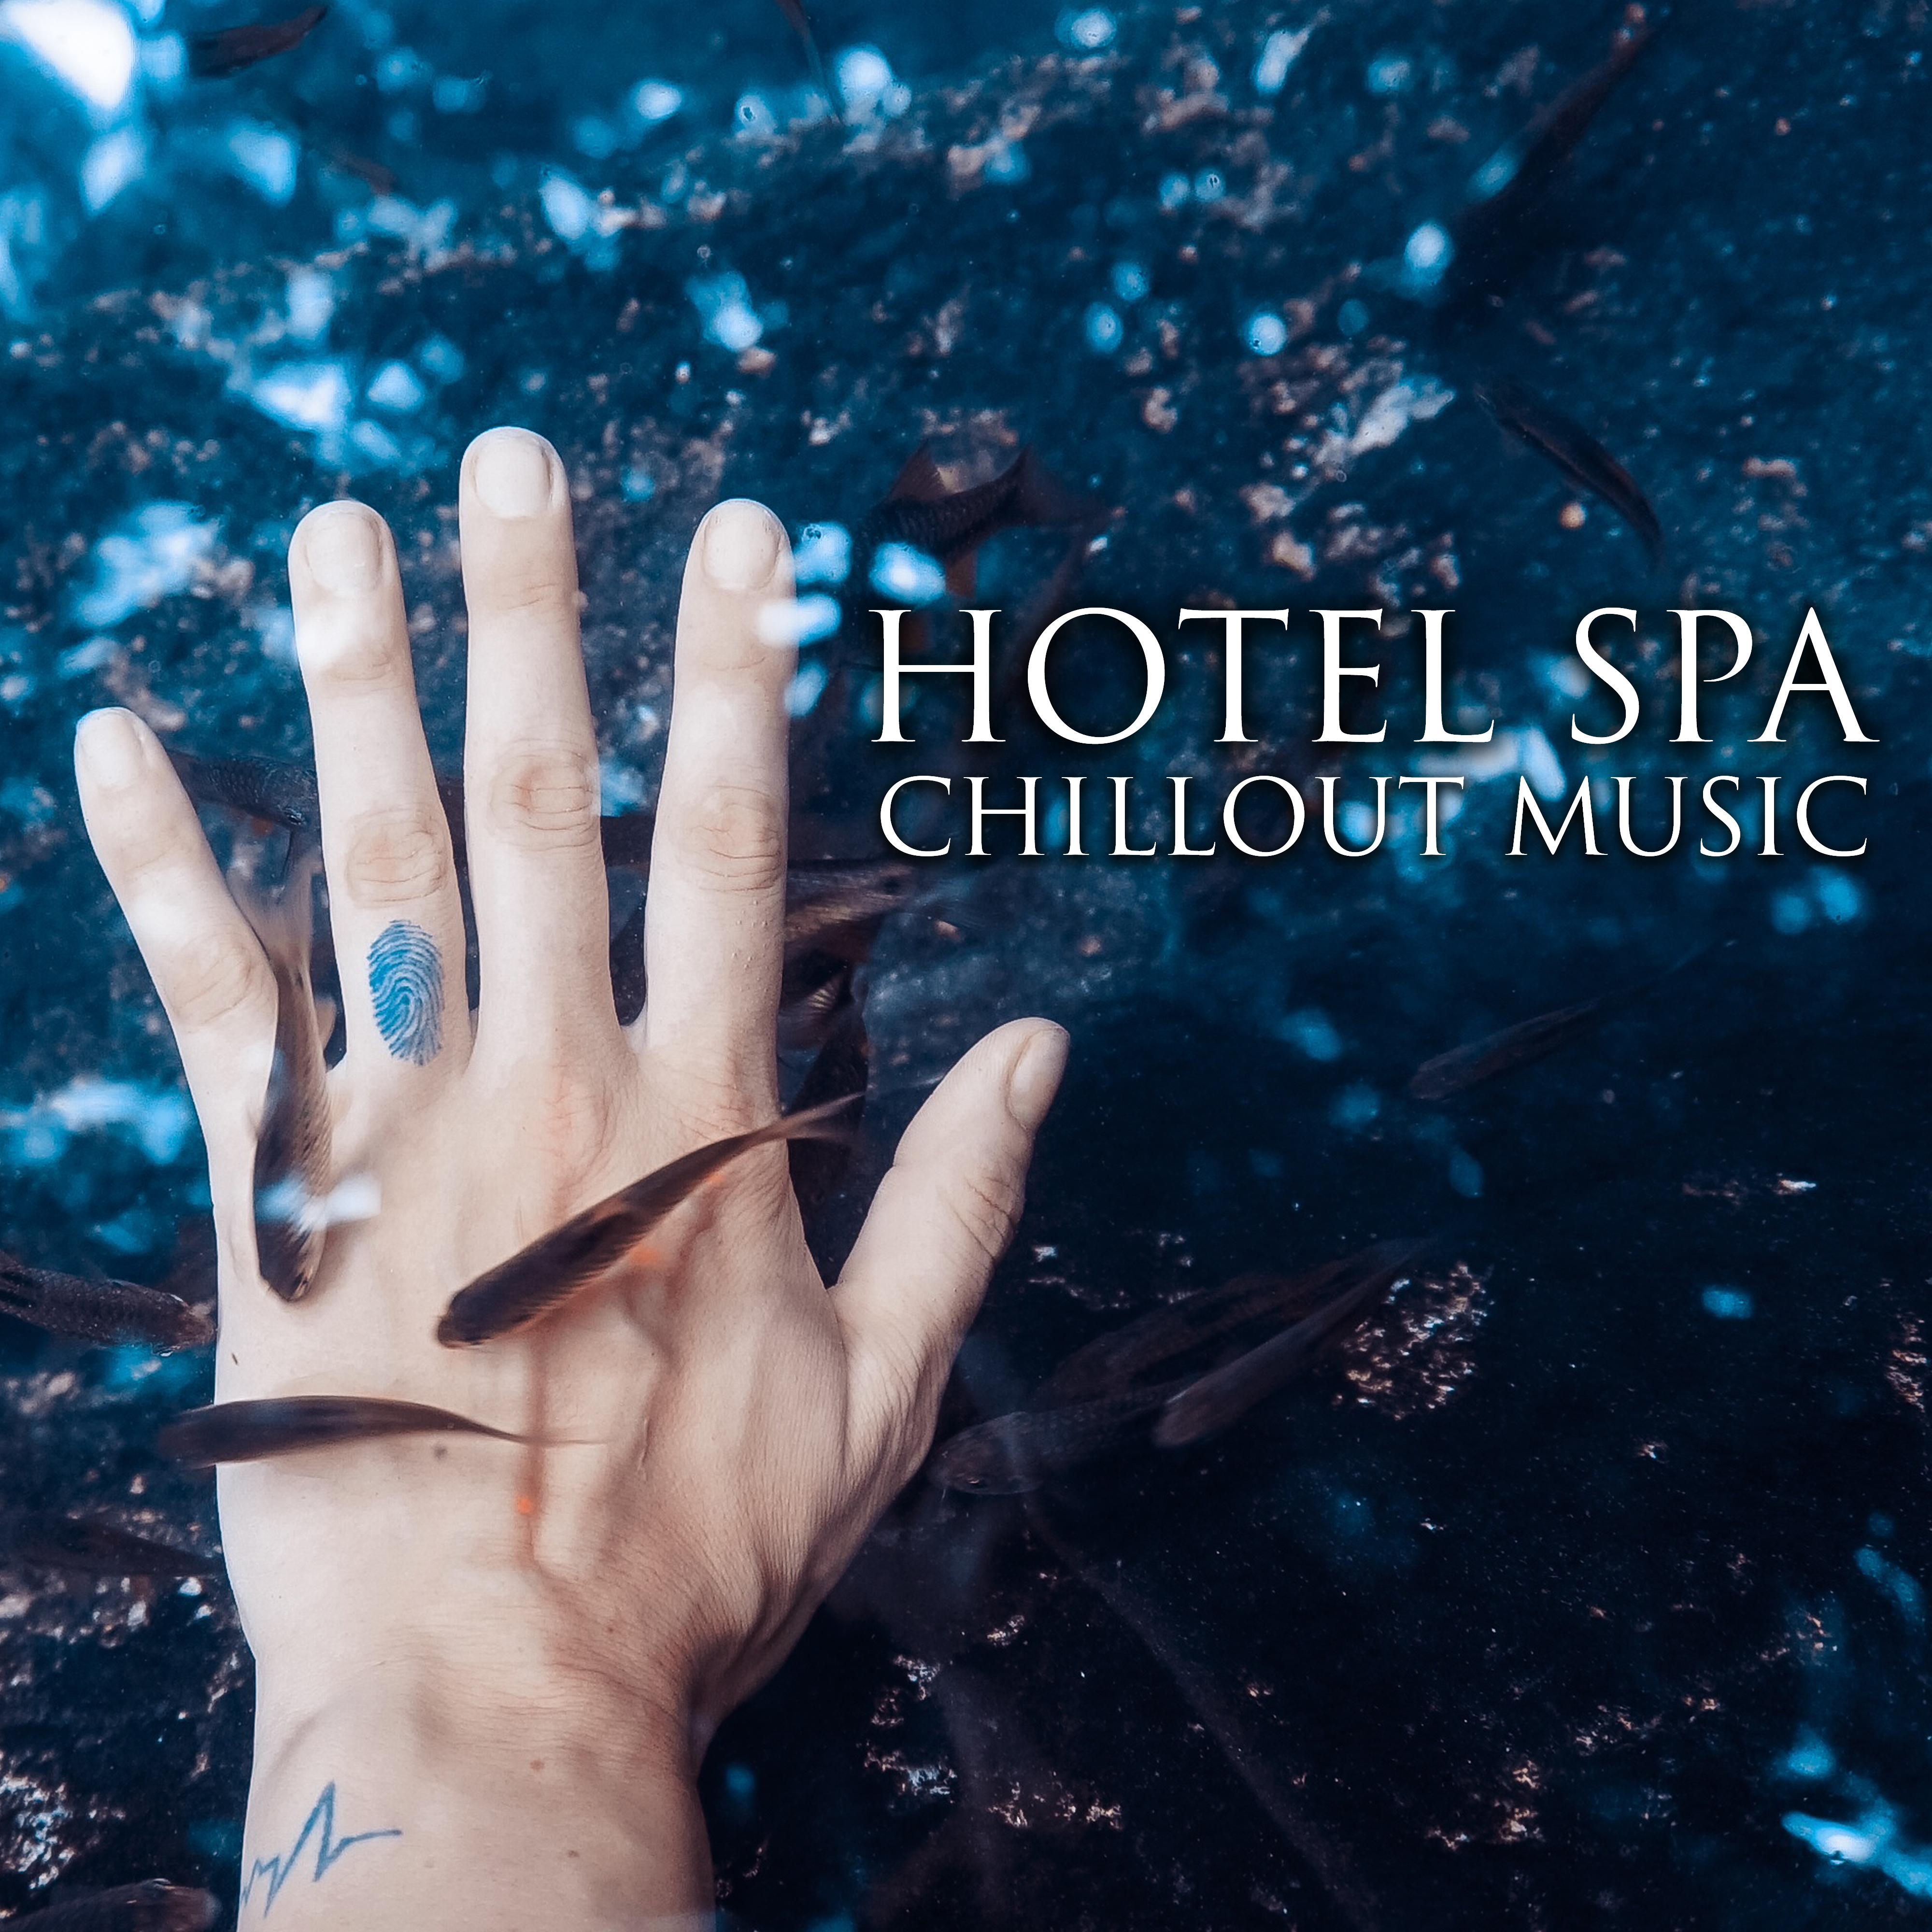 Hotel Spa Chillout Music  Essential Chillout for Spa, Wellness, Tropical Vibes, Chill Out Music